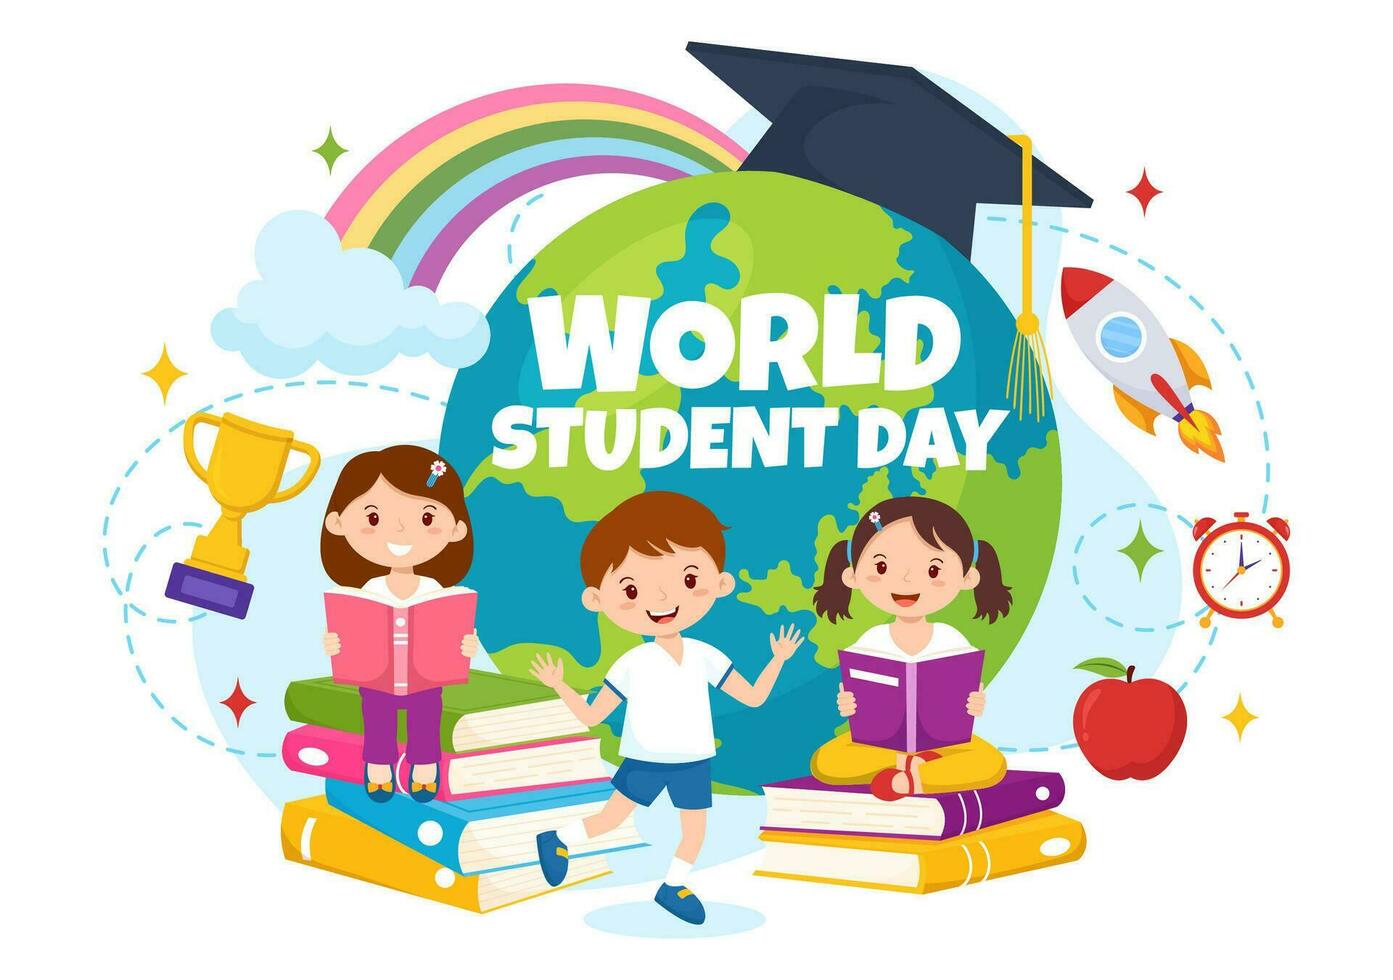 World Students Day Vector Illustration on October 15 with Student, Book, Globe and More for Web Banner or Poster in Kids Cartoon Background Design